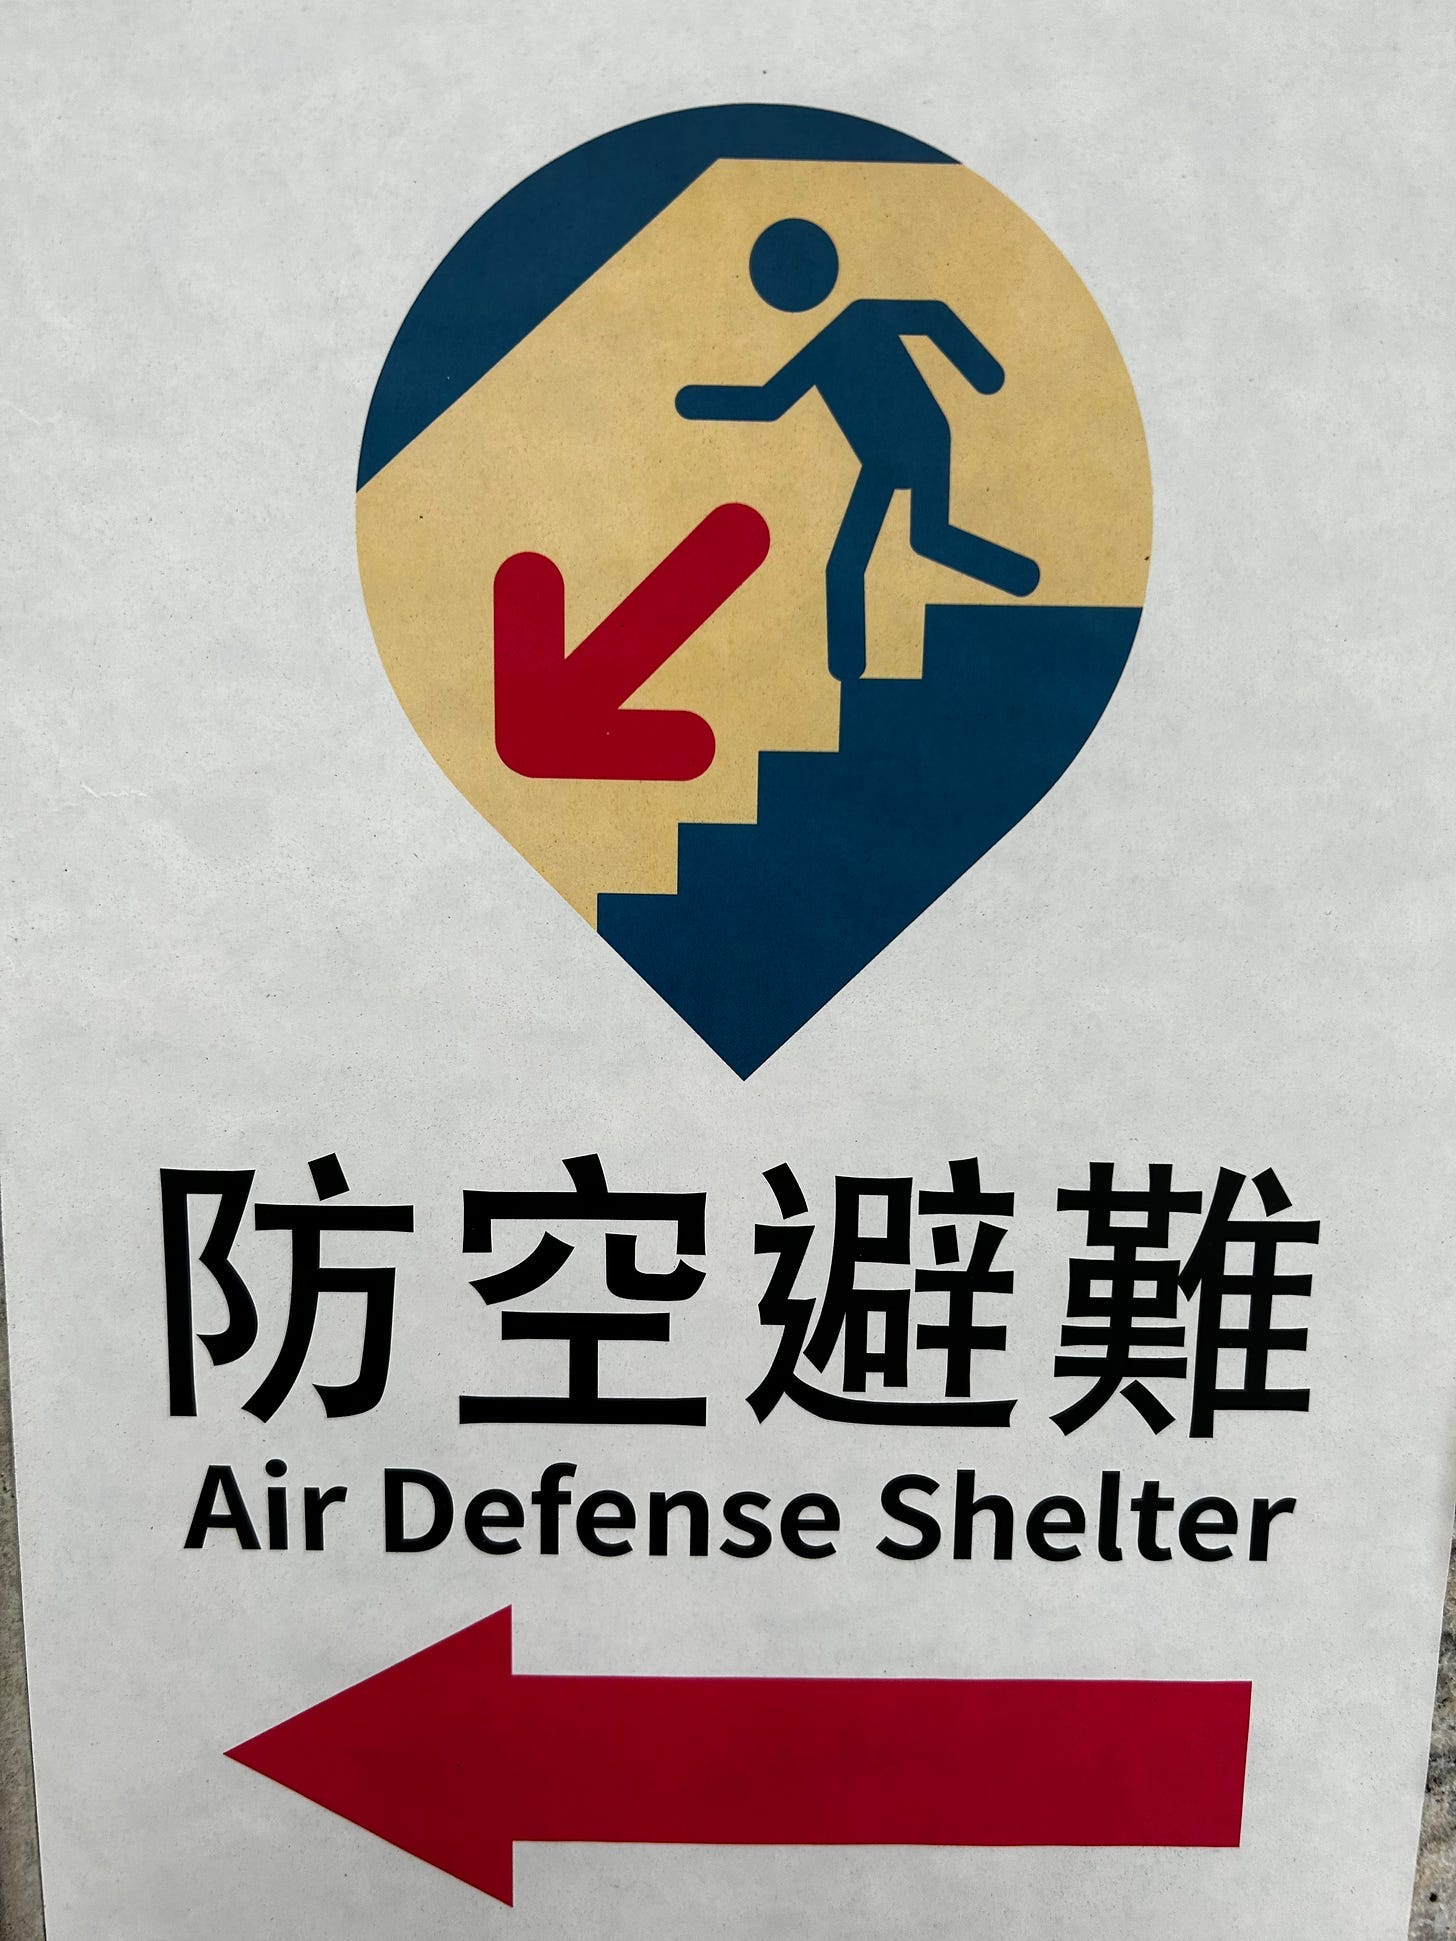 A sign with a person running up stairs and an arrow

Description automatically generated